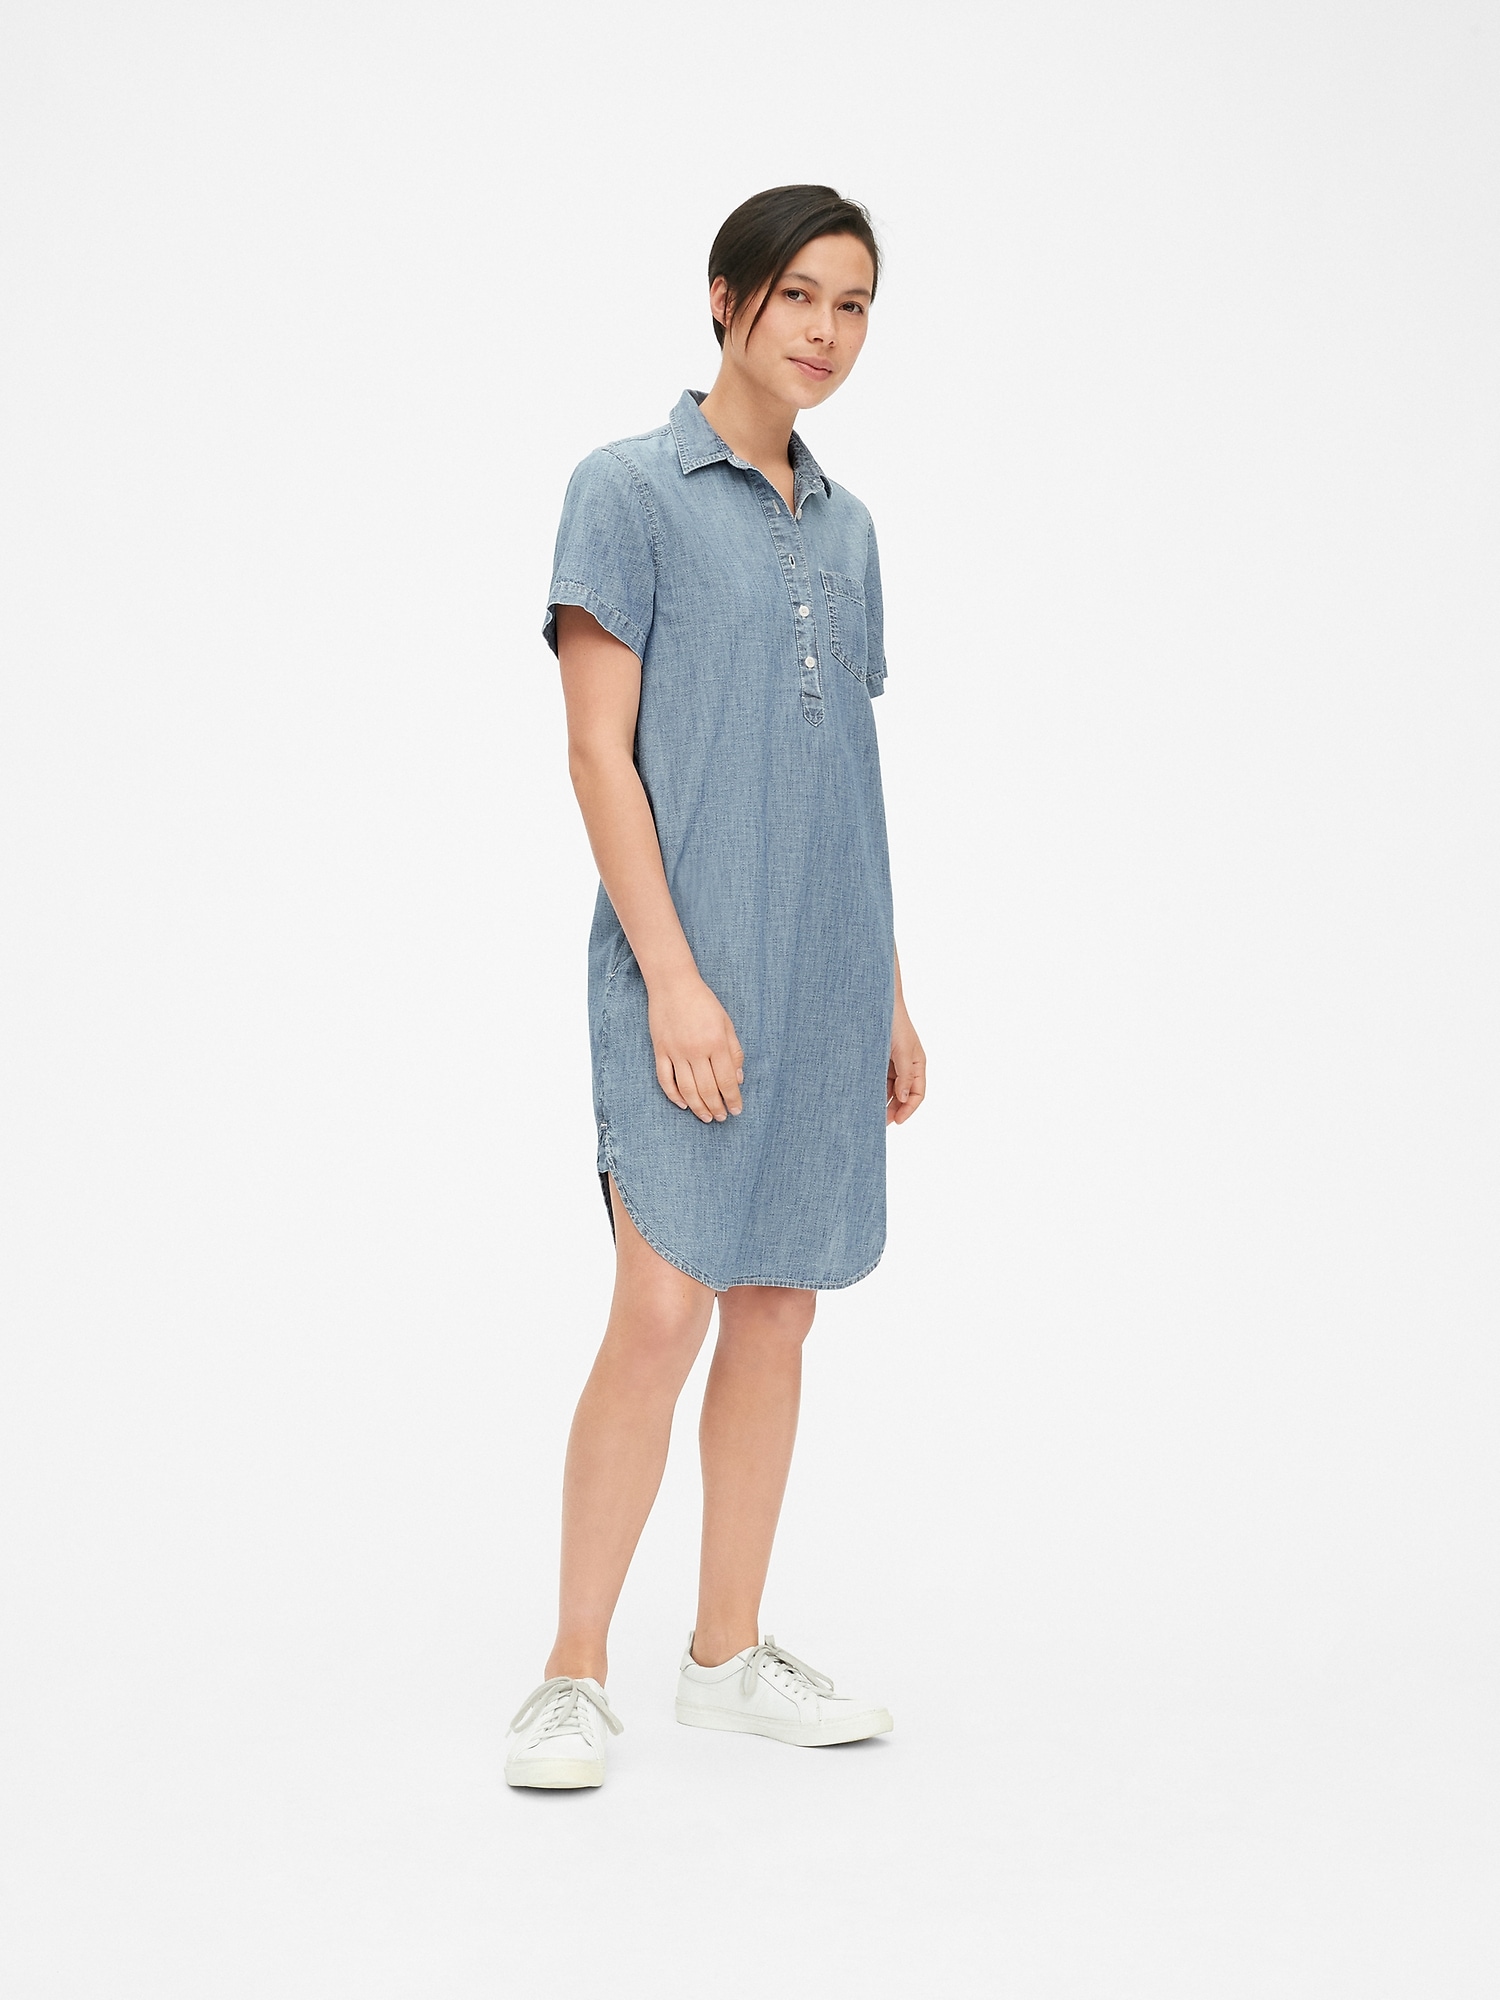 Perfect Popover Shirtdress in Chambray | Gap